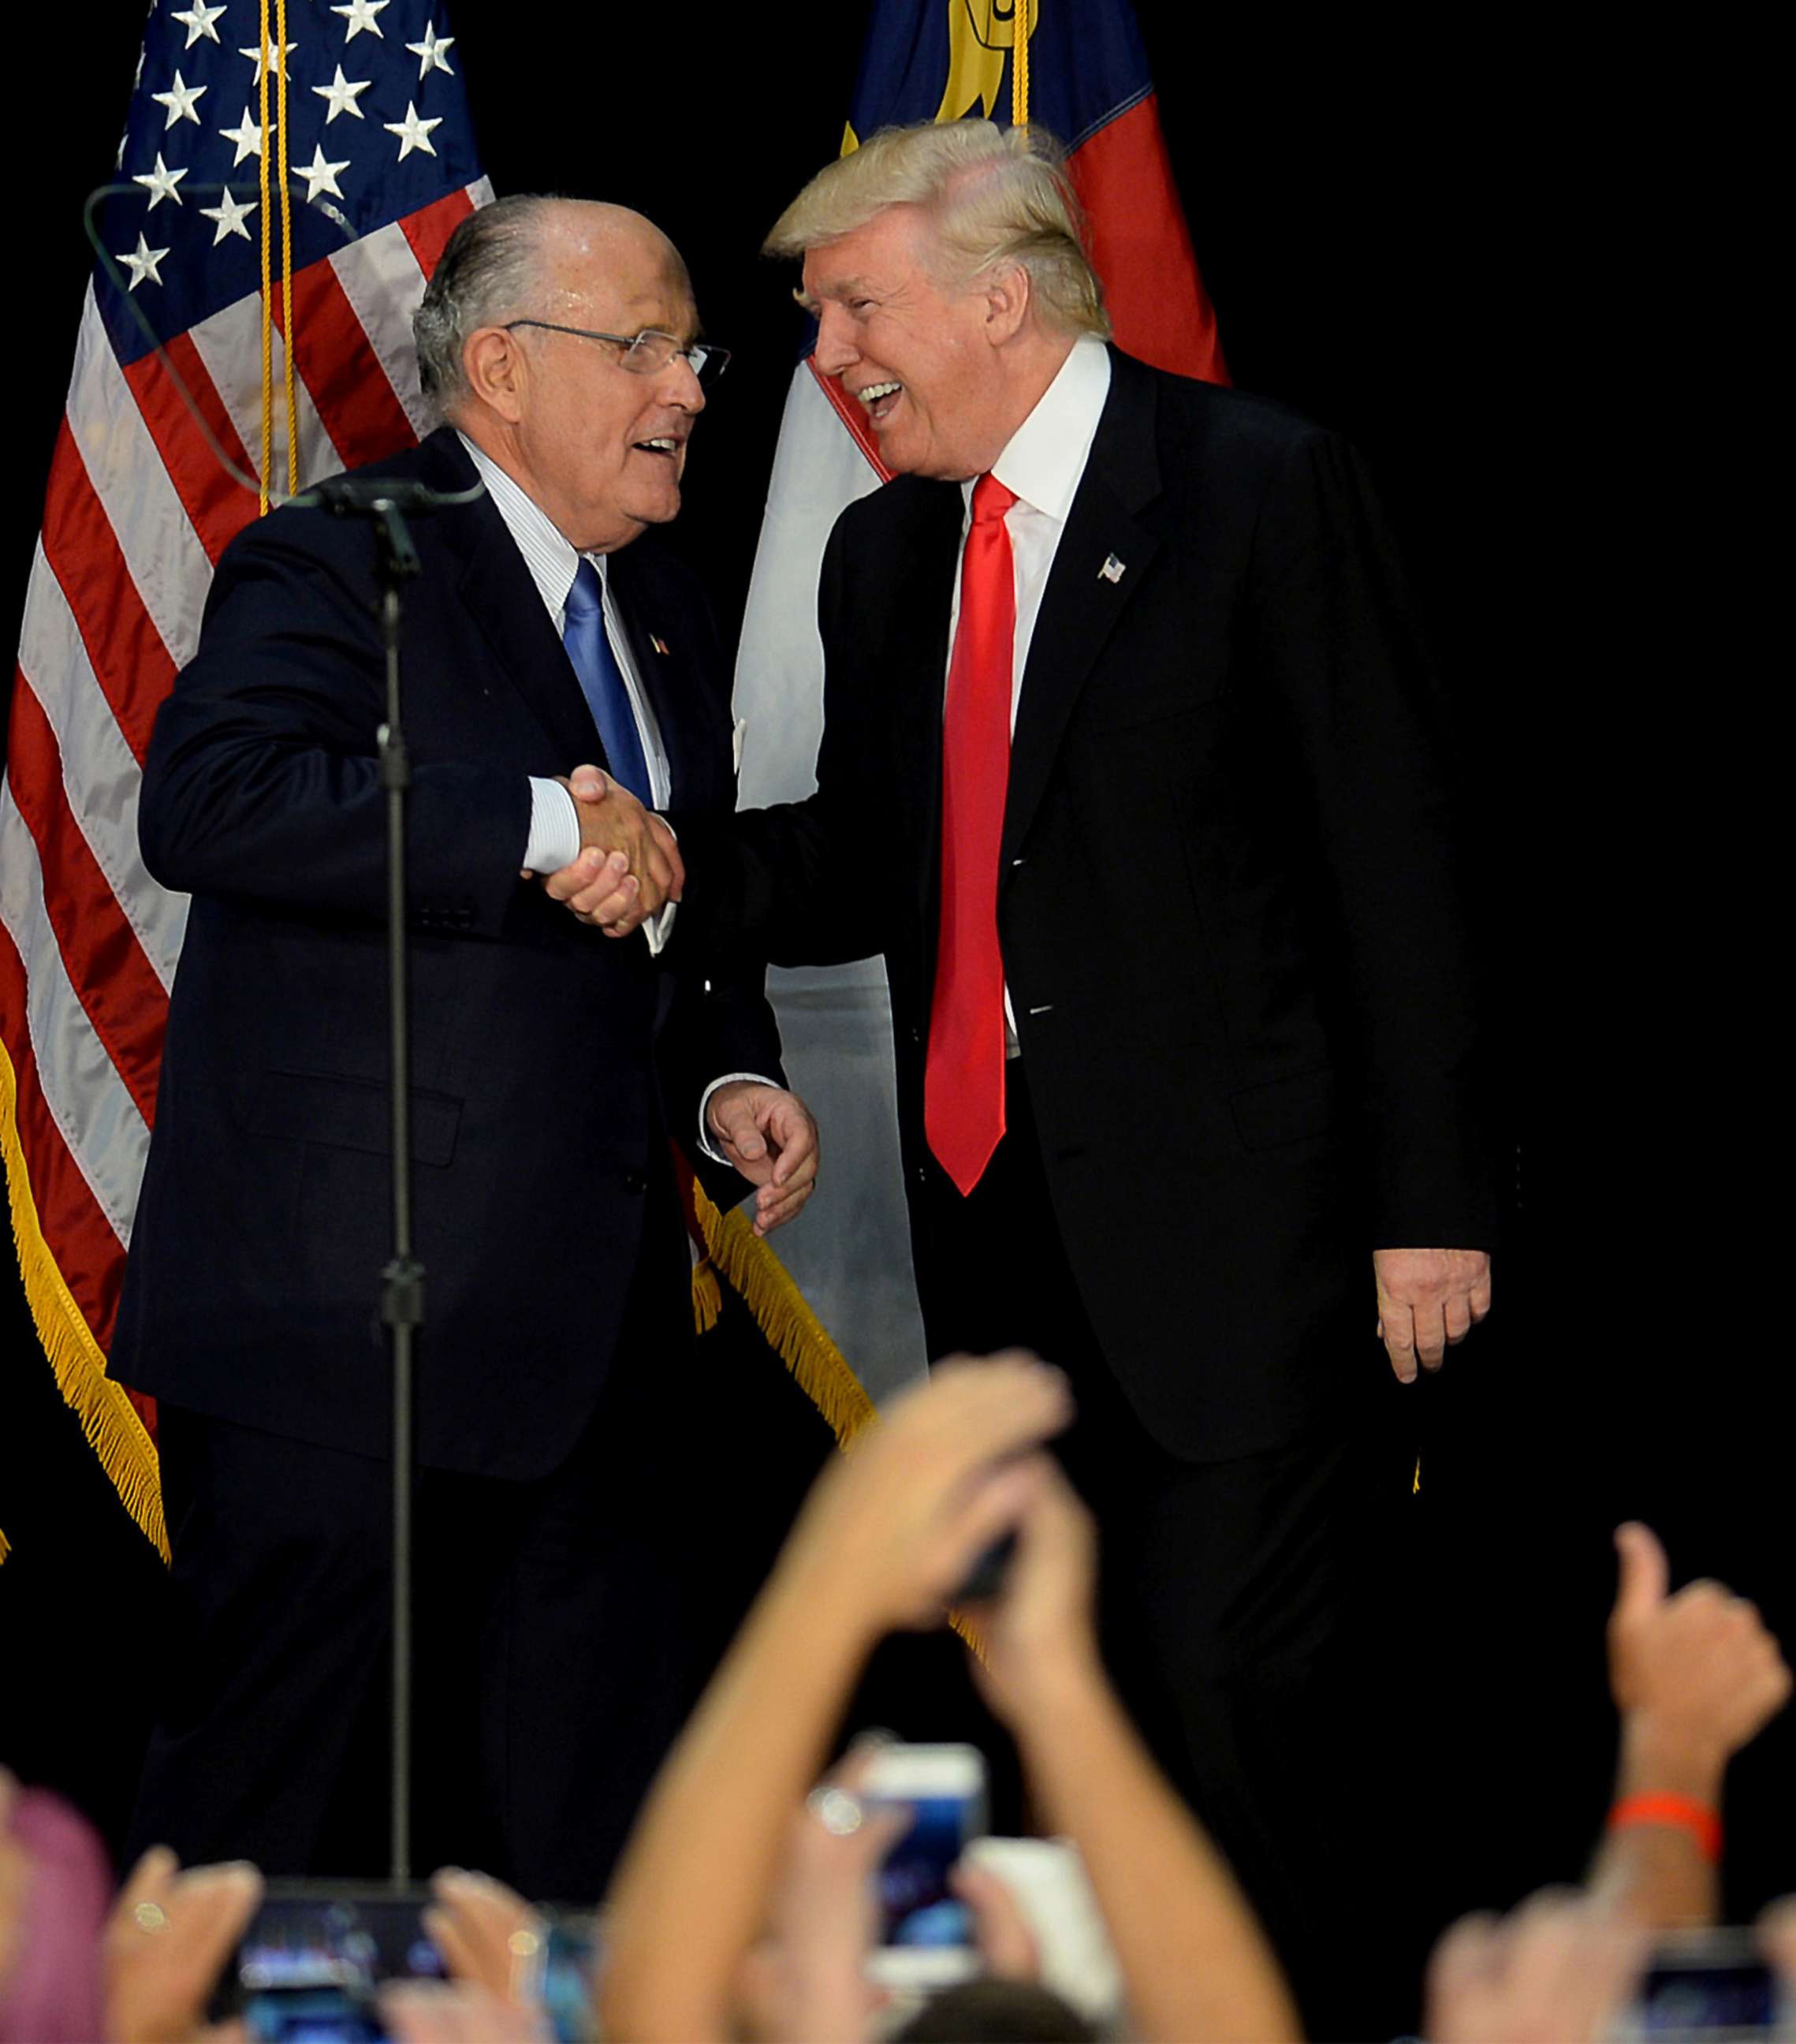 PHOTO: In this file photo, former New York City mayor Rudy Giuliani welcomes Republican presidential candidate Donald Trump on stage during a campaign rally in Charlotte, N.C., Aug. 18, 2016.